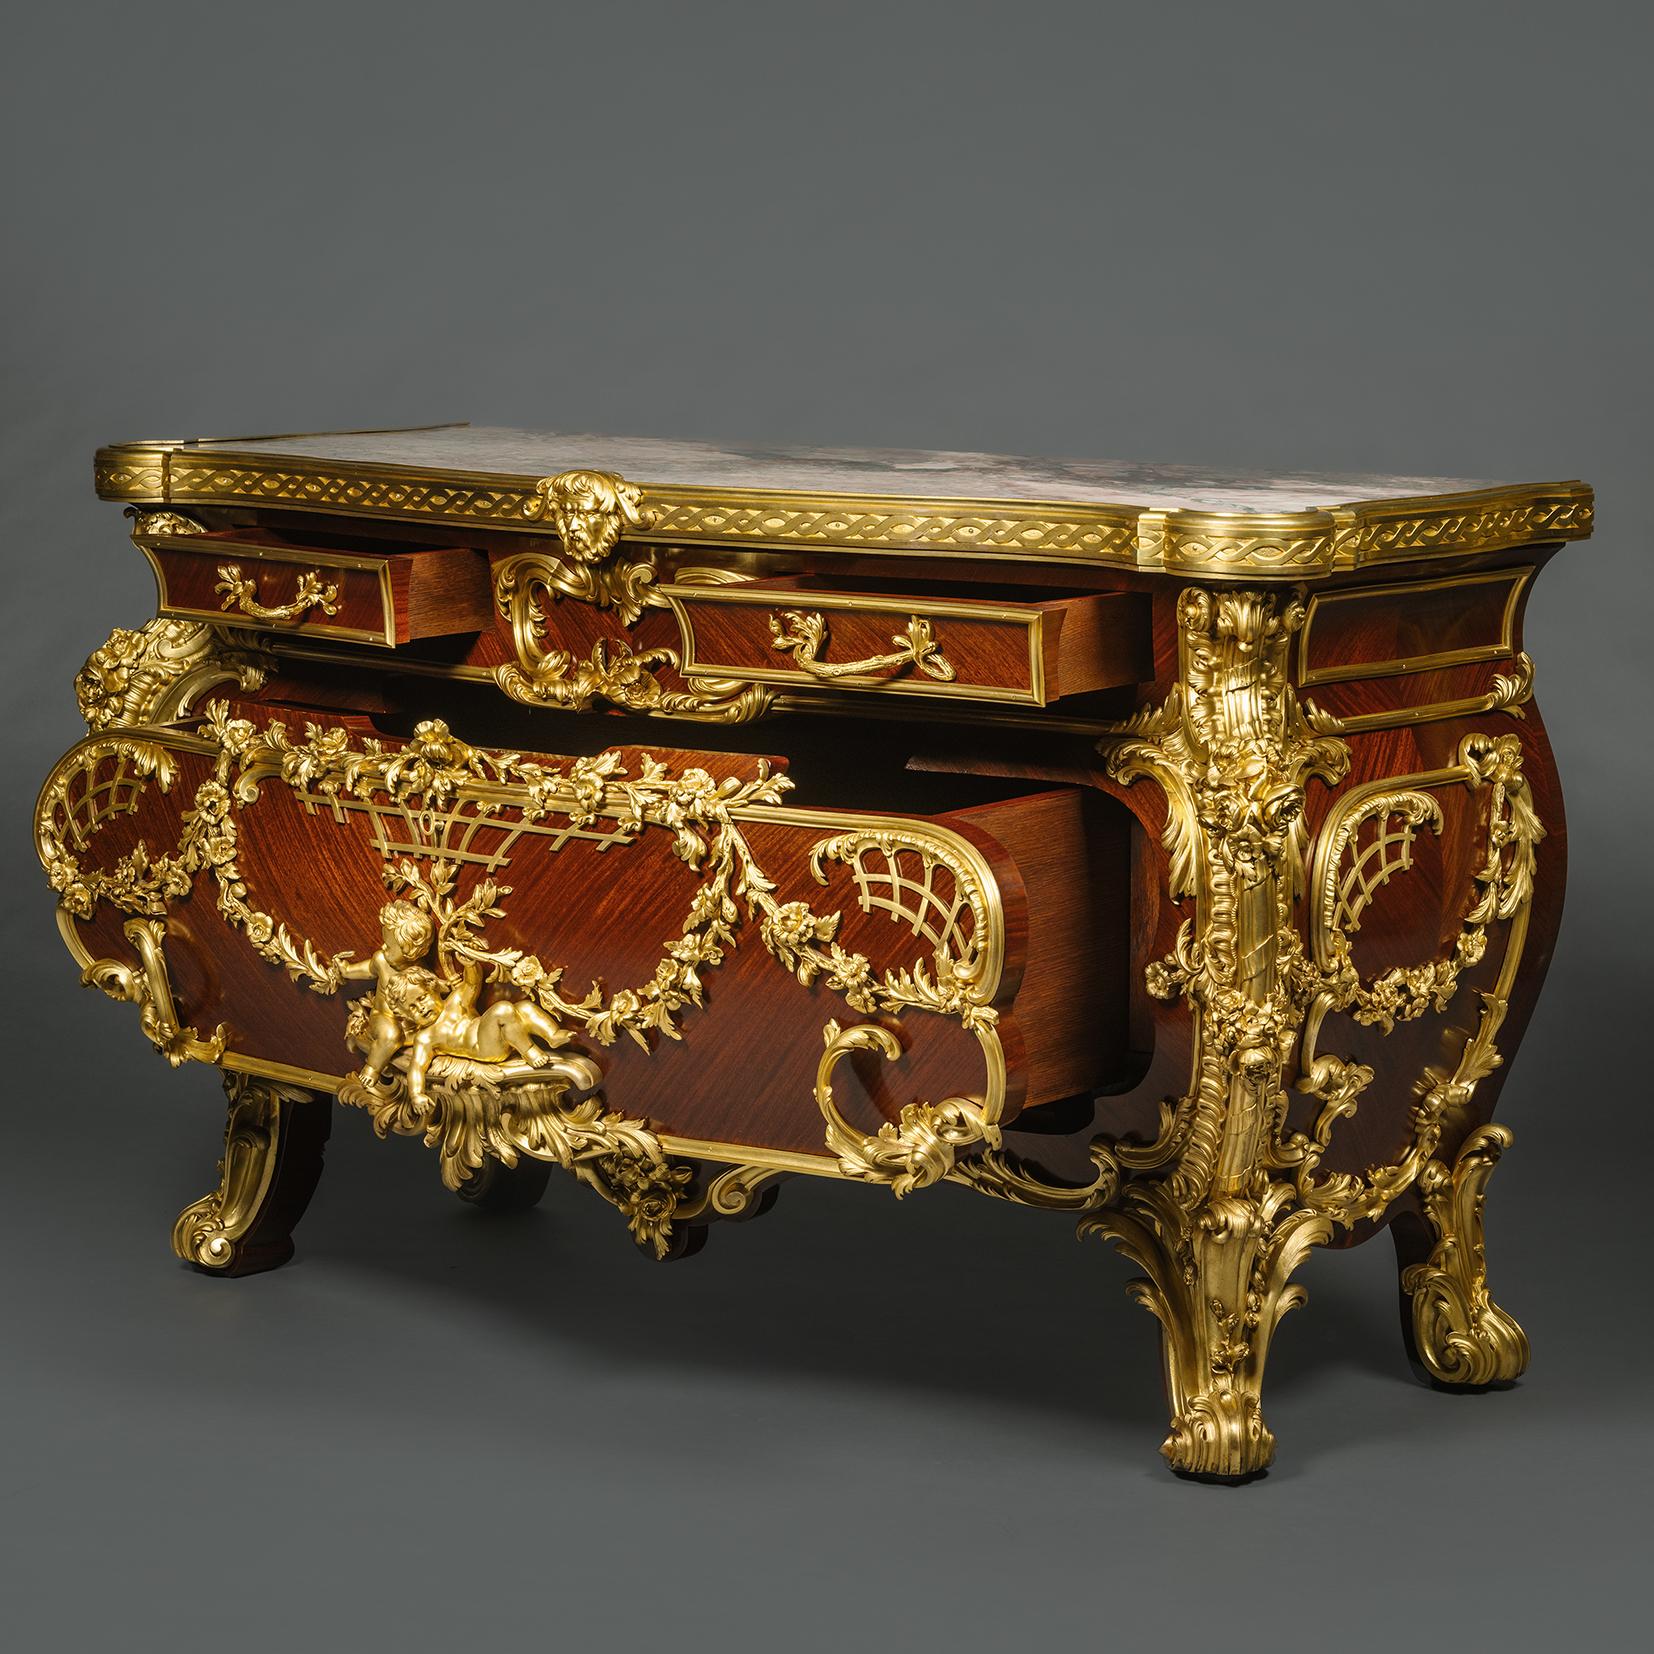 Belgian A Magnificent Rococo Style Commode After Johann Melchoir Kambli For Sale